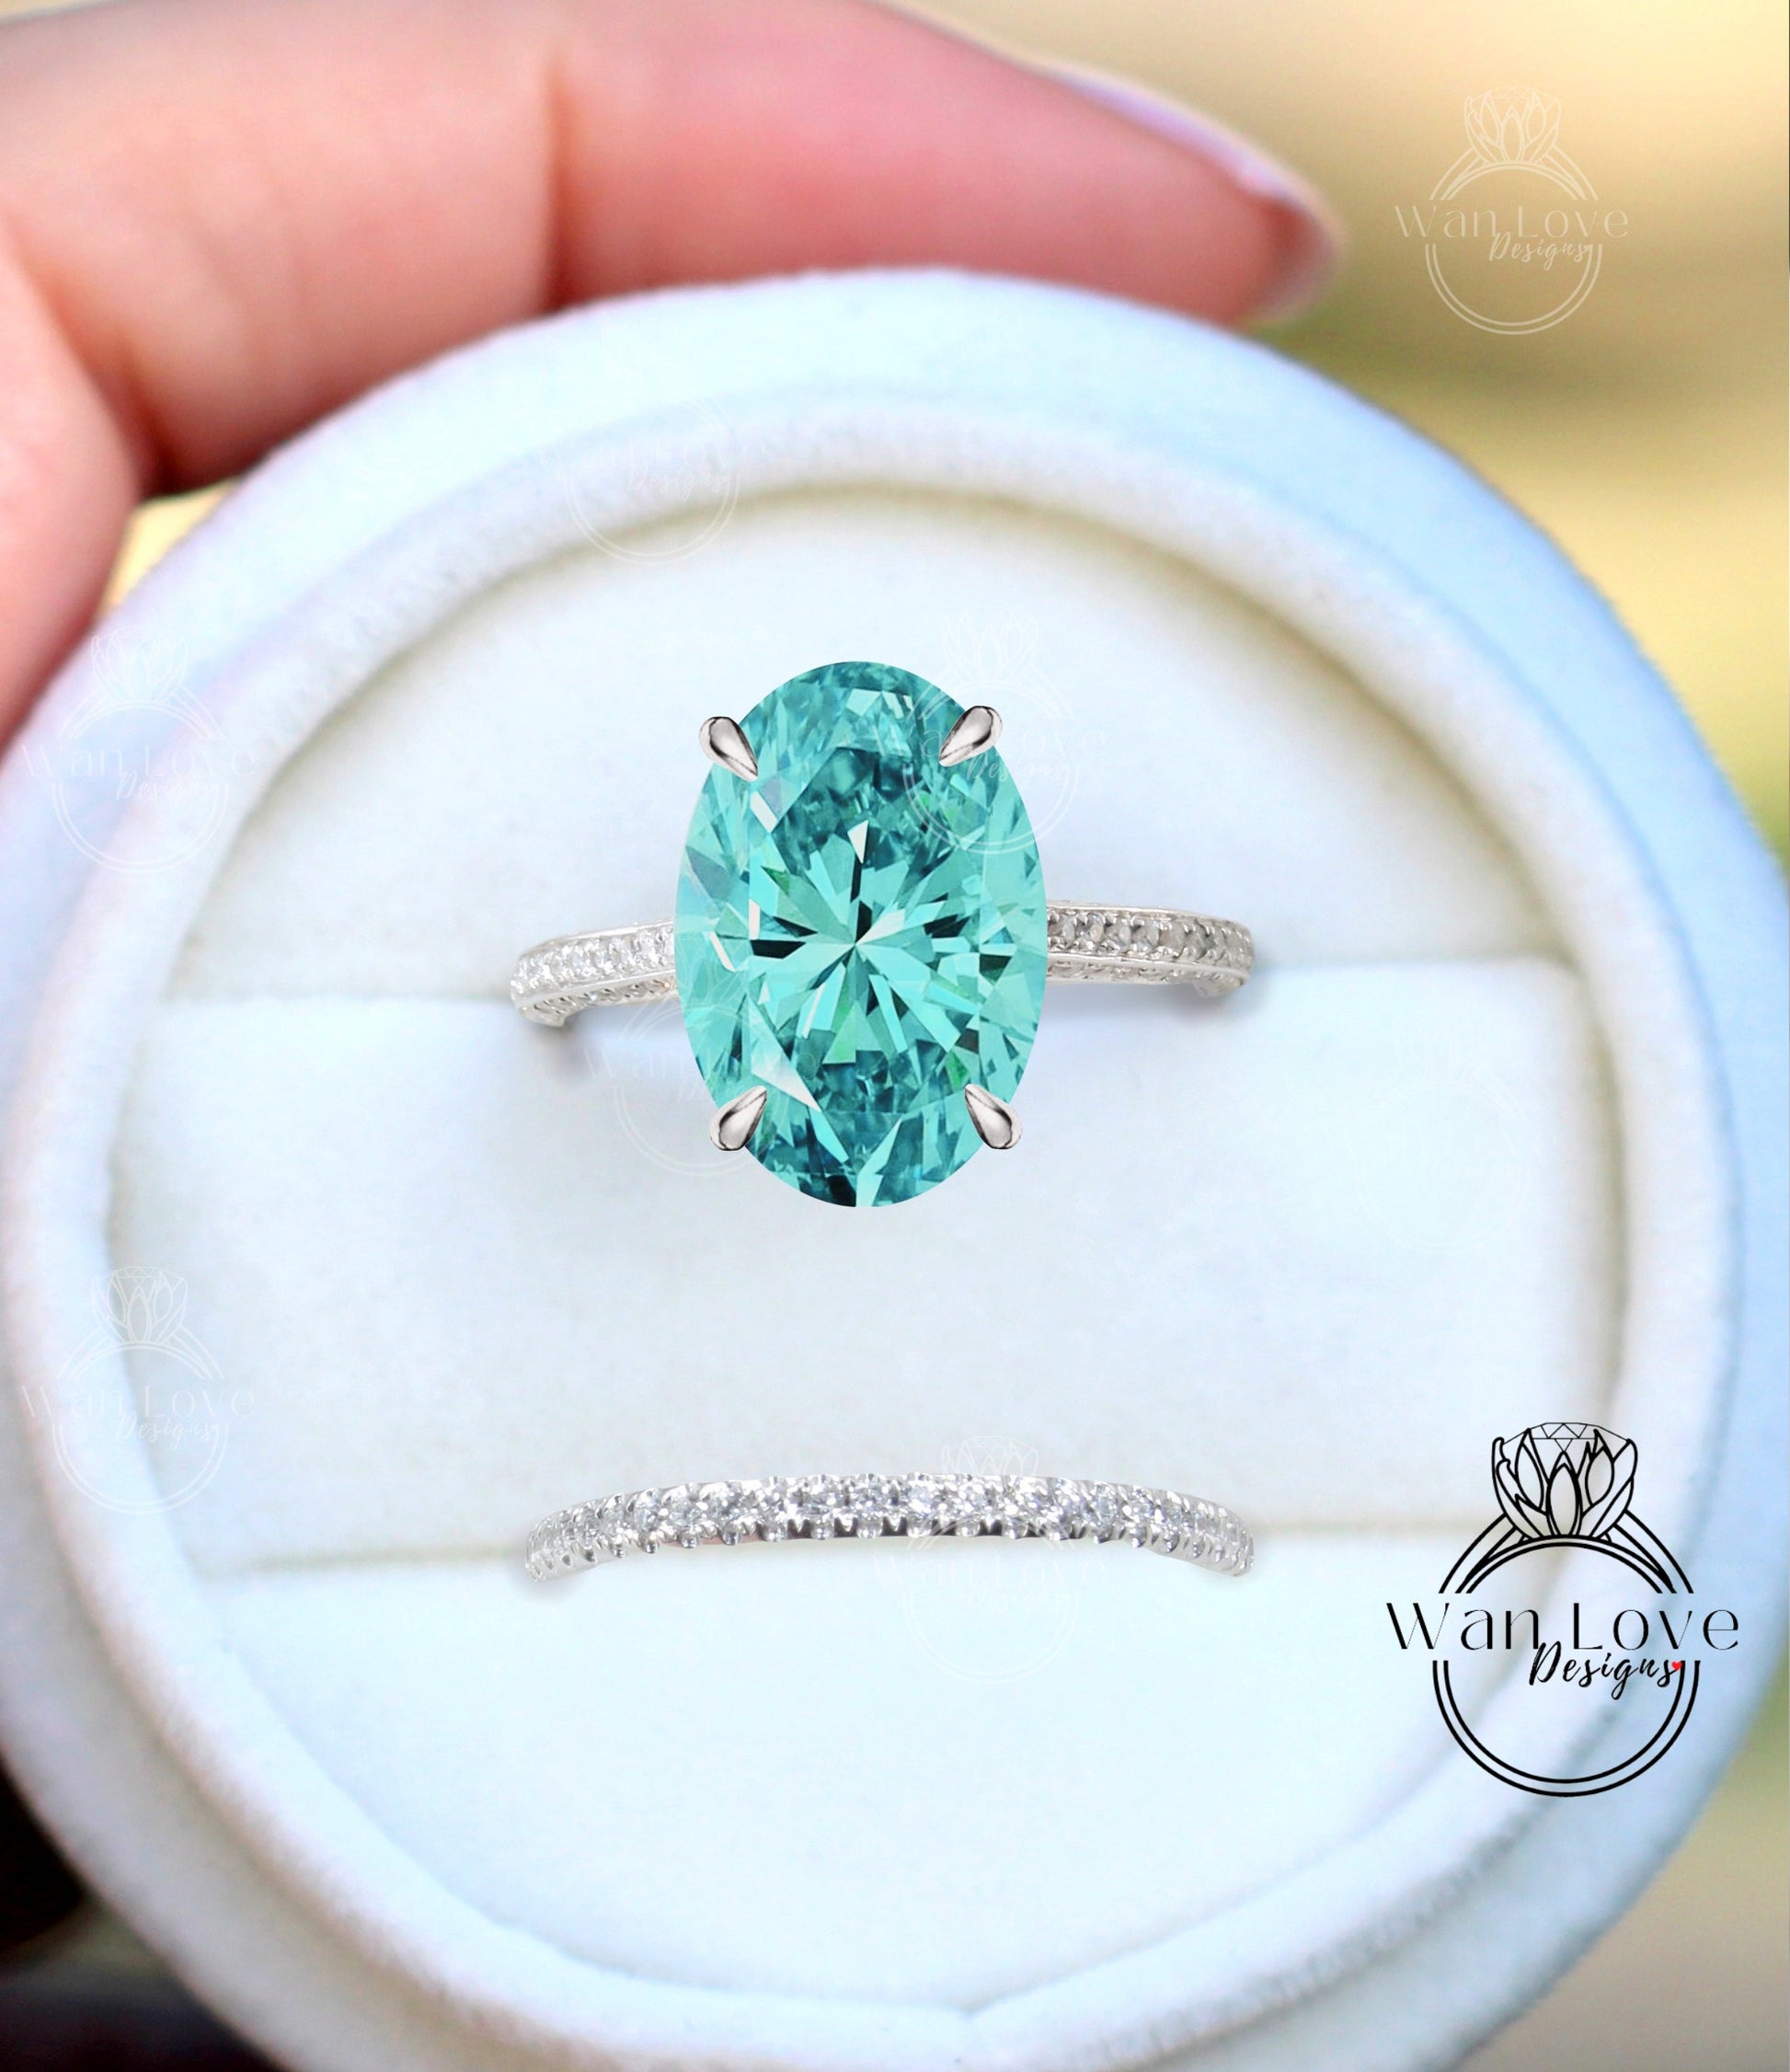 Oval Blue Green Moissanite engagement ring set Celebrity style bridal set rose gold Oval cut diamond side halo antique wedding ring Anniversary ring Wan Love Designs